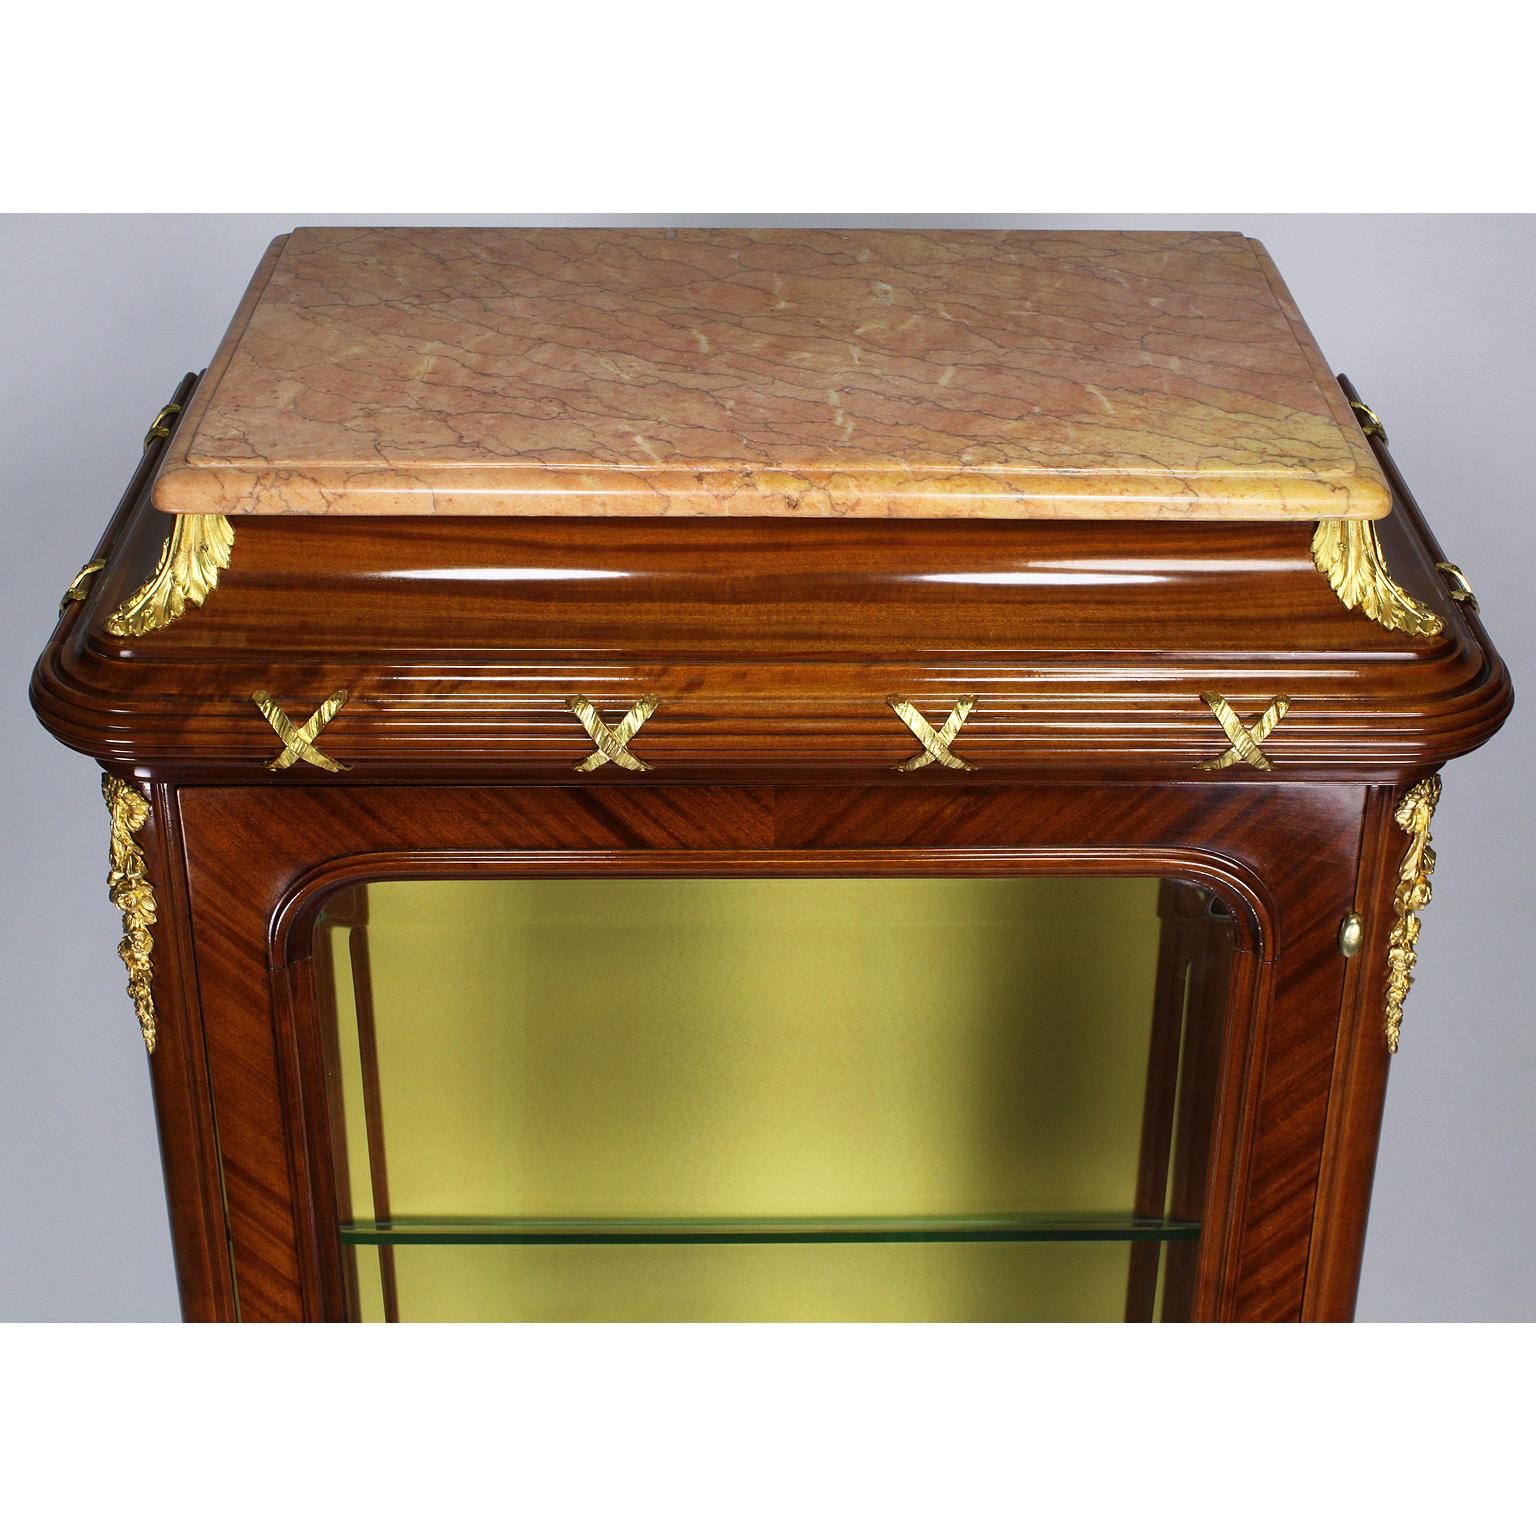 Fine French 19th-20th Century Louis XV Style Ormolu-Mounted Tulipwood Vitrine In Good Condition For Sale In Los Angeles, CA